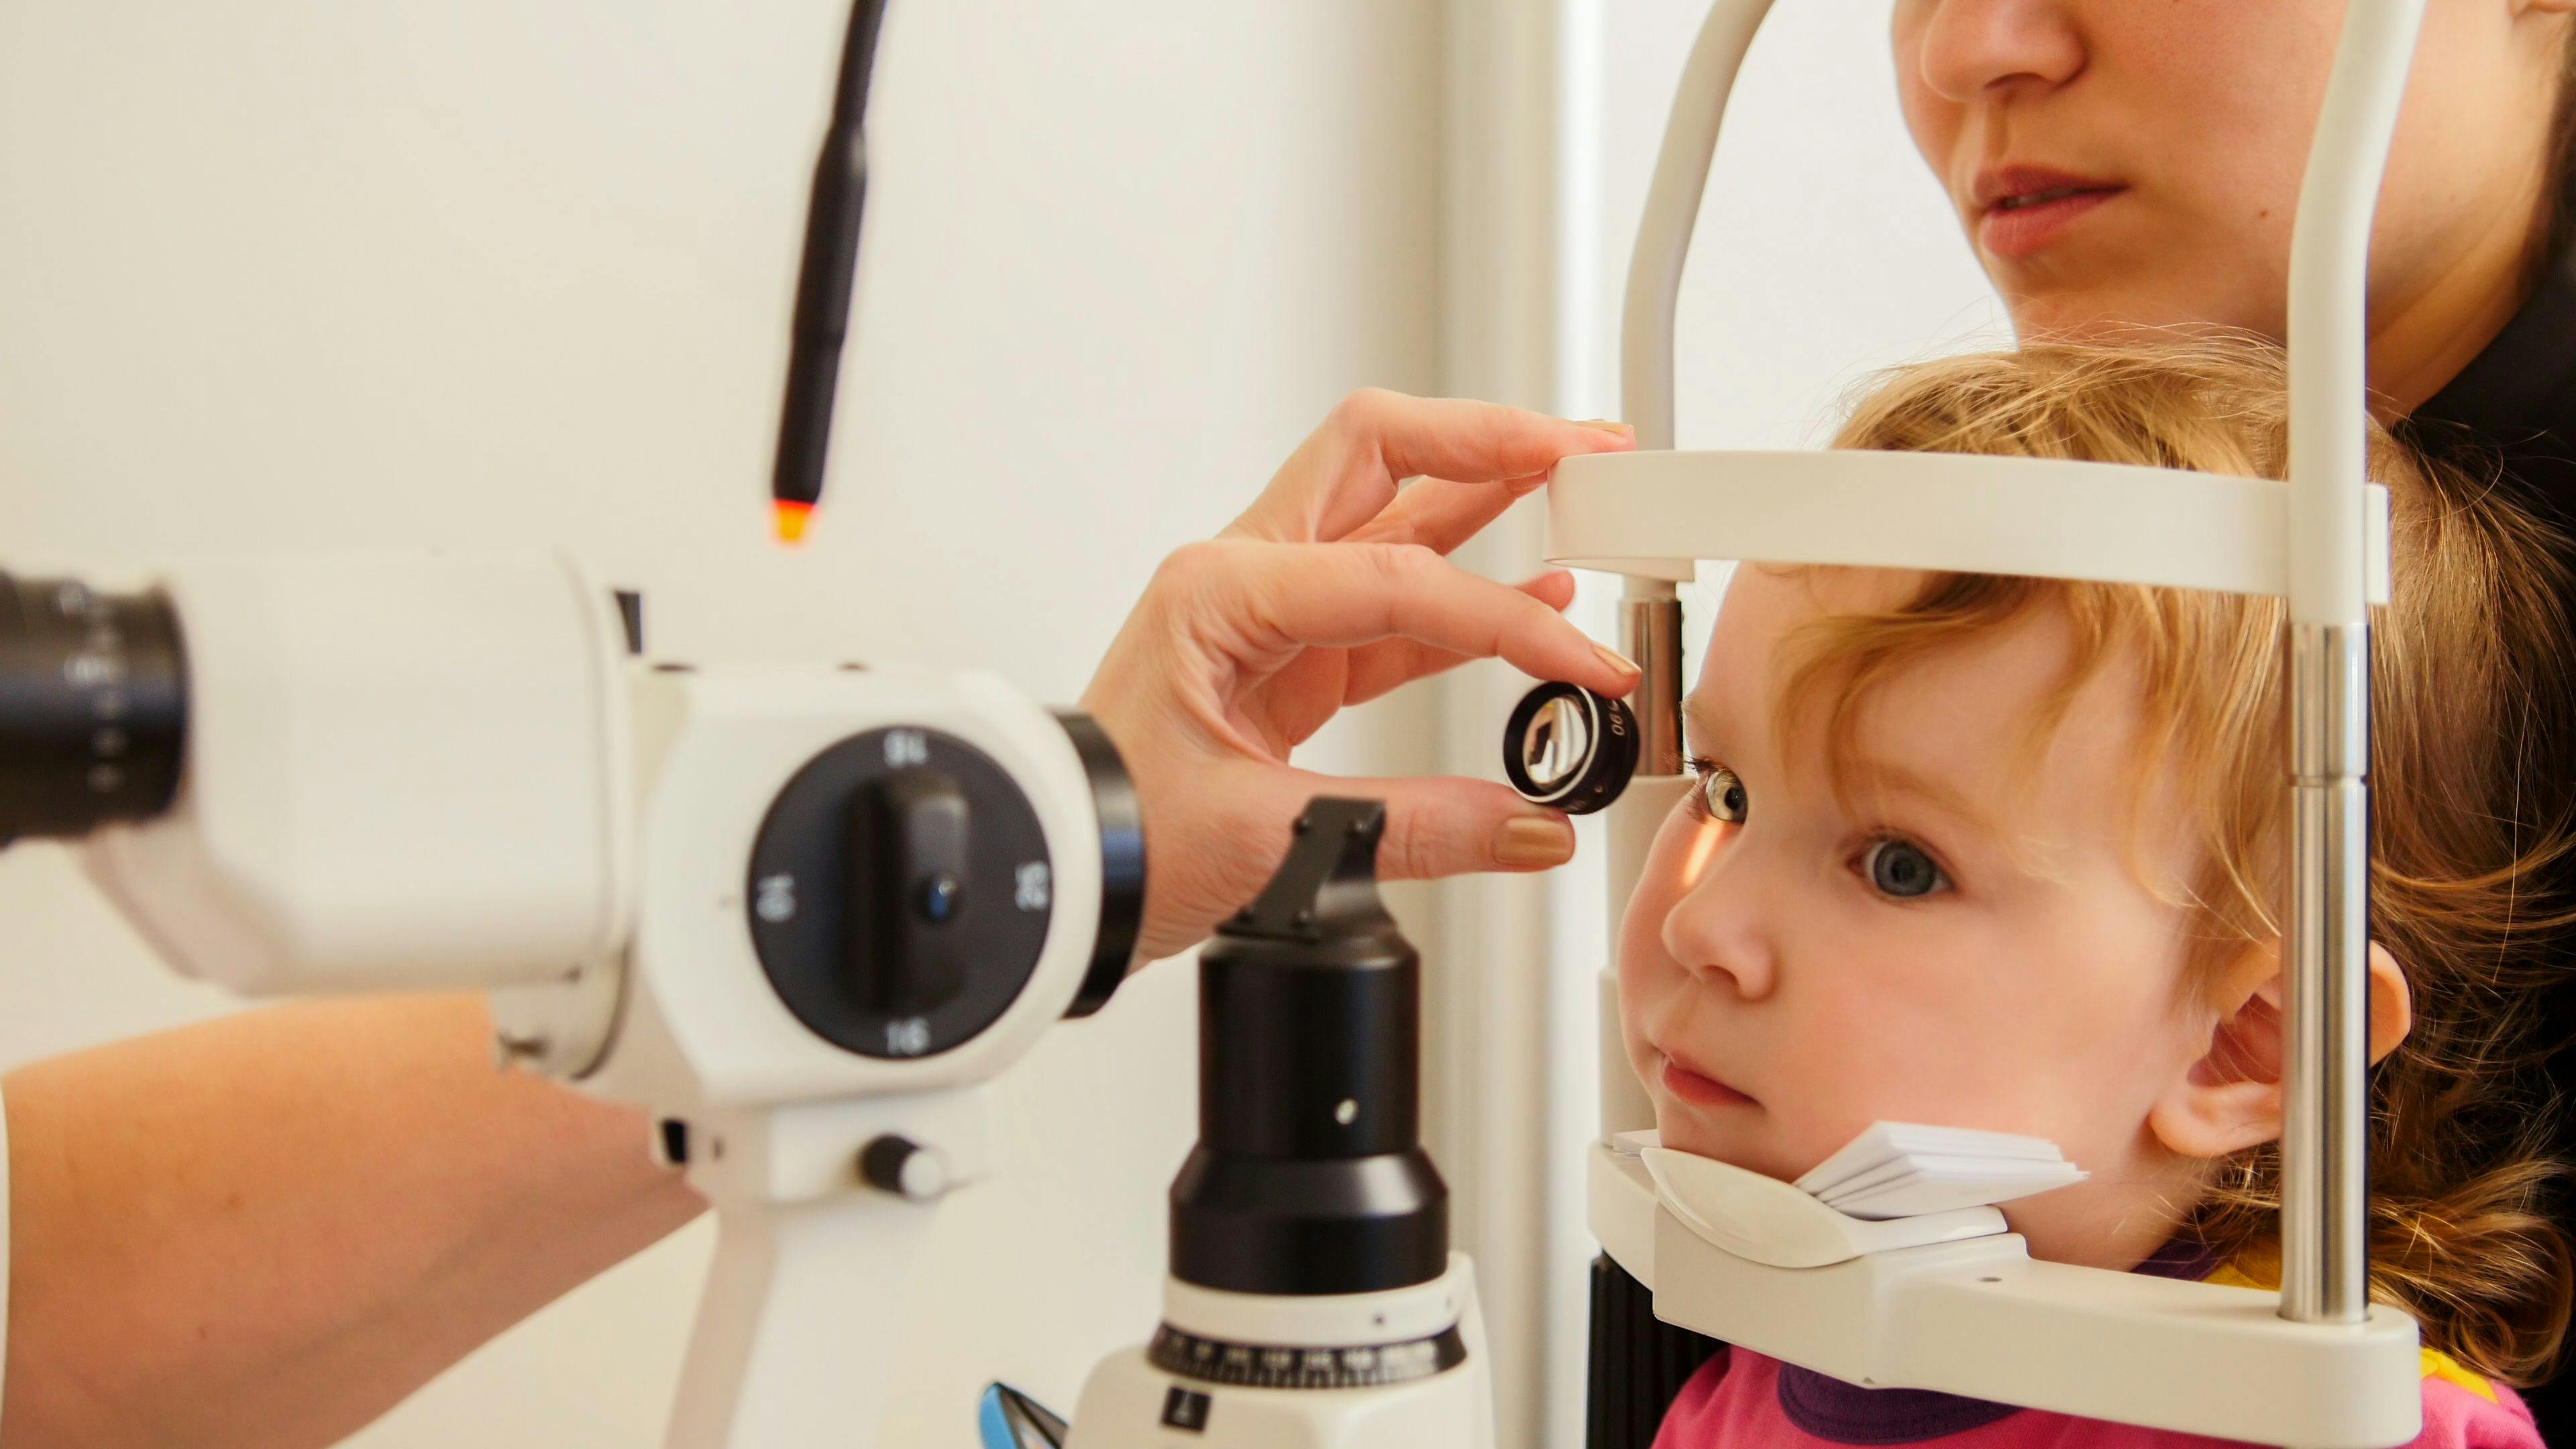 90% of U.S. Counties Lack a Pediatric Ophthalmologist 